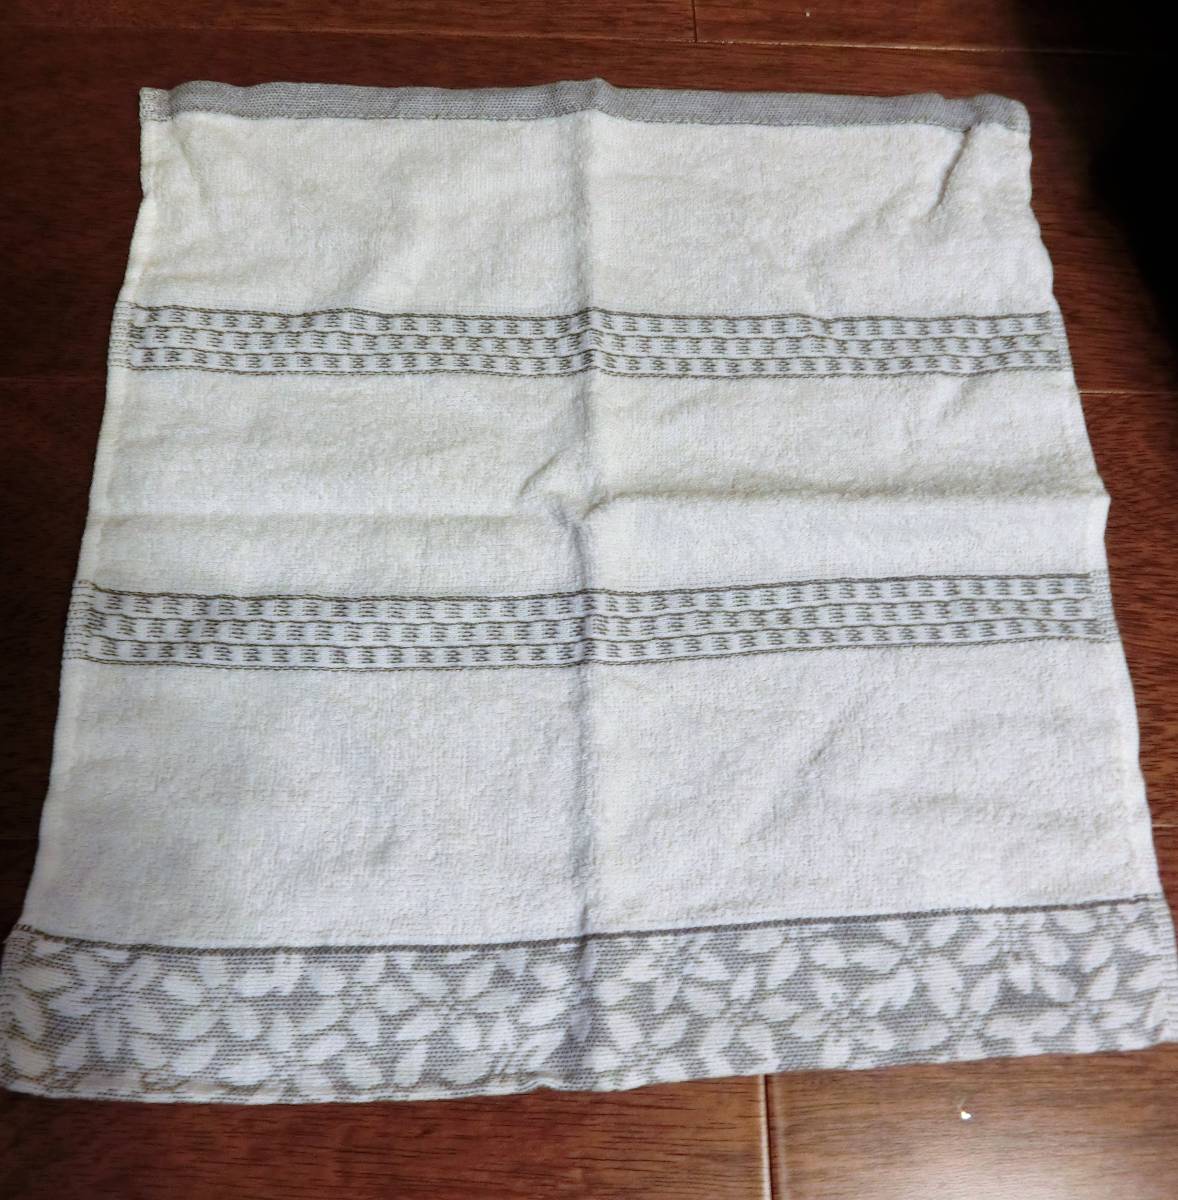 ! new goods unused . bargain * large size hand towel *BELLSOFT white floral print made in Japan cotton 100%. face wet towel oshibori cleaning!